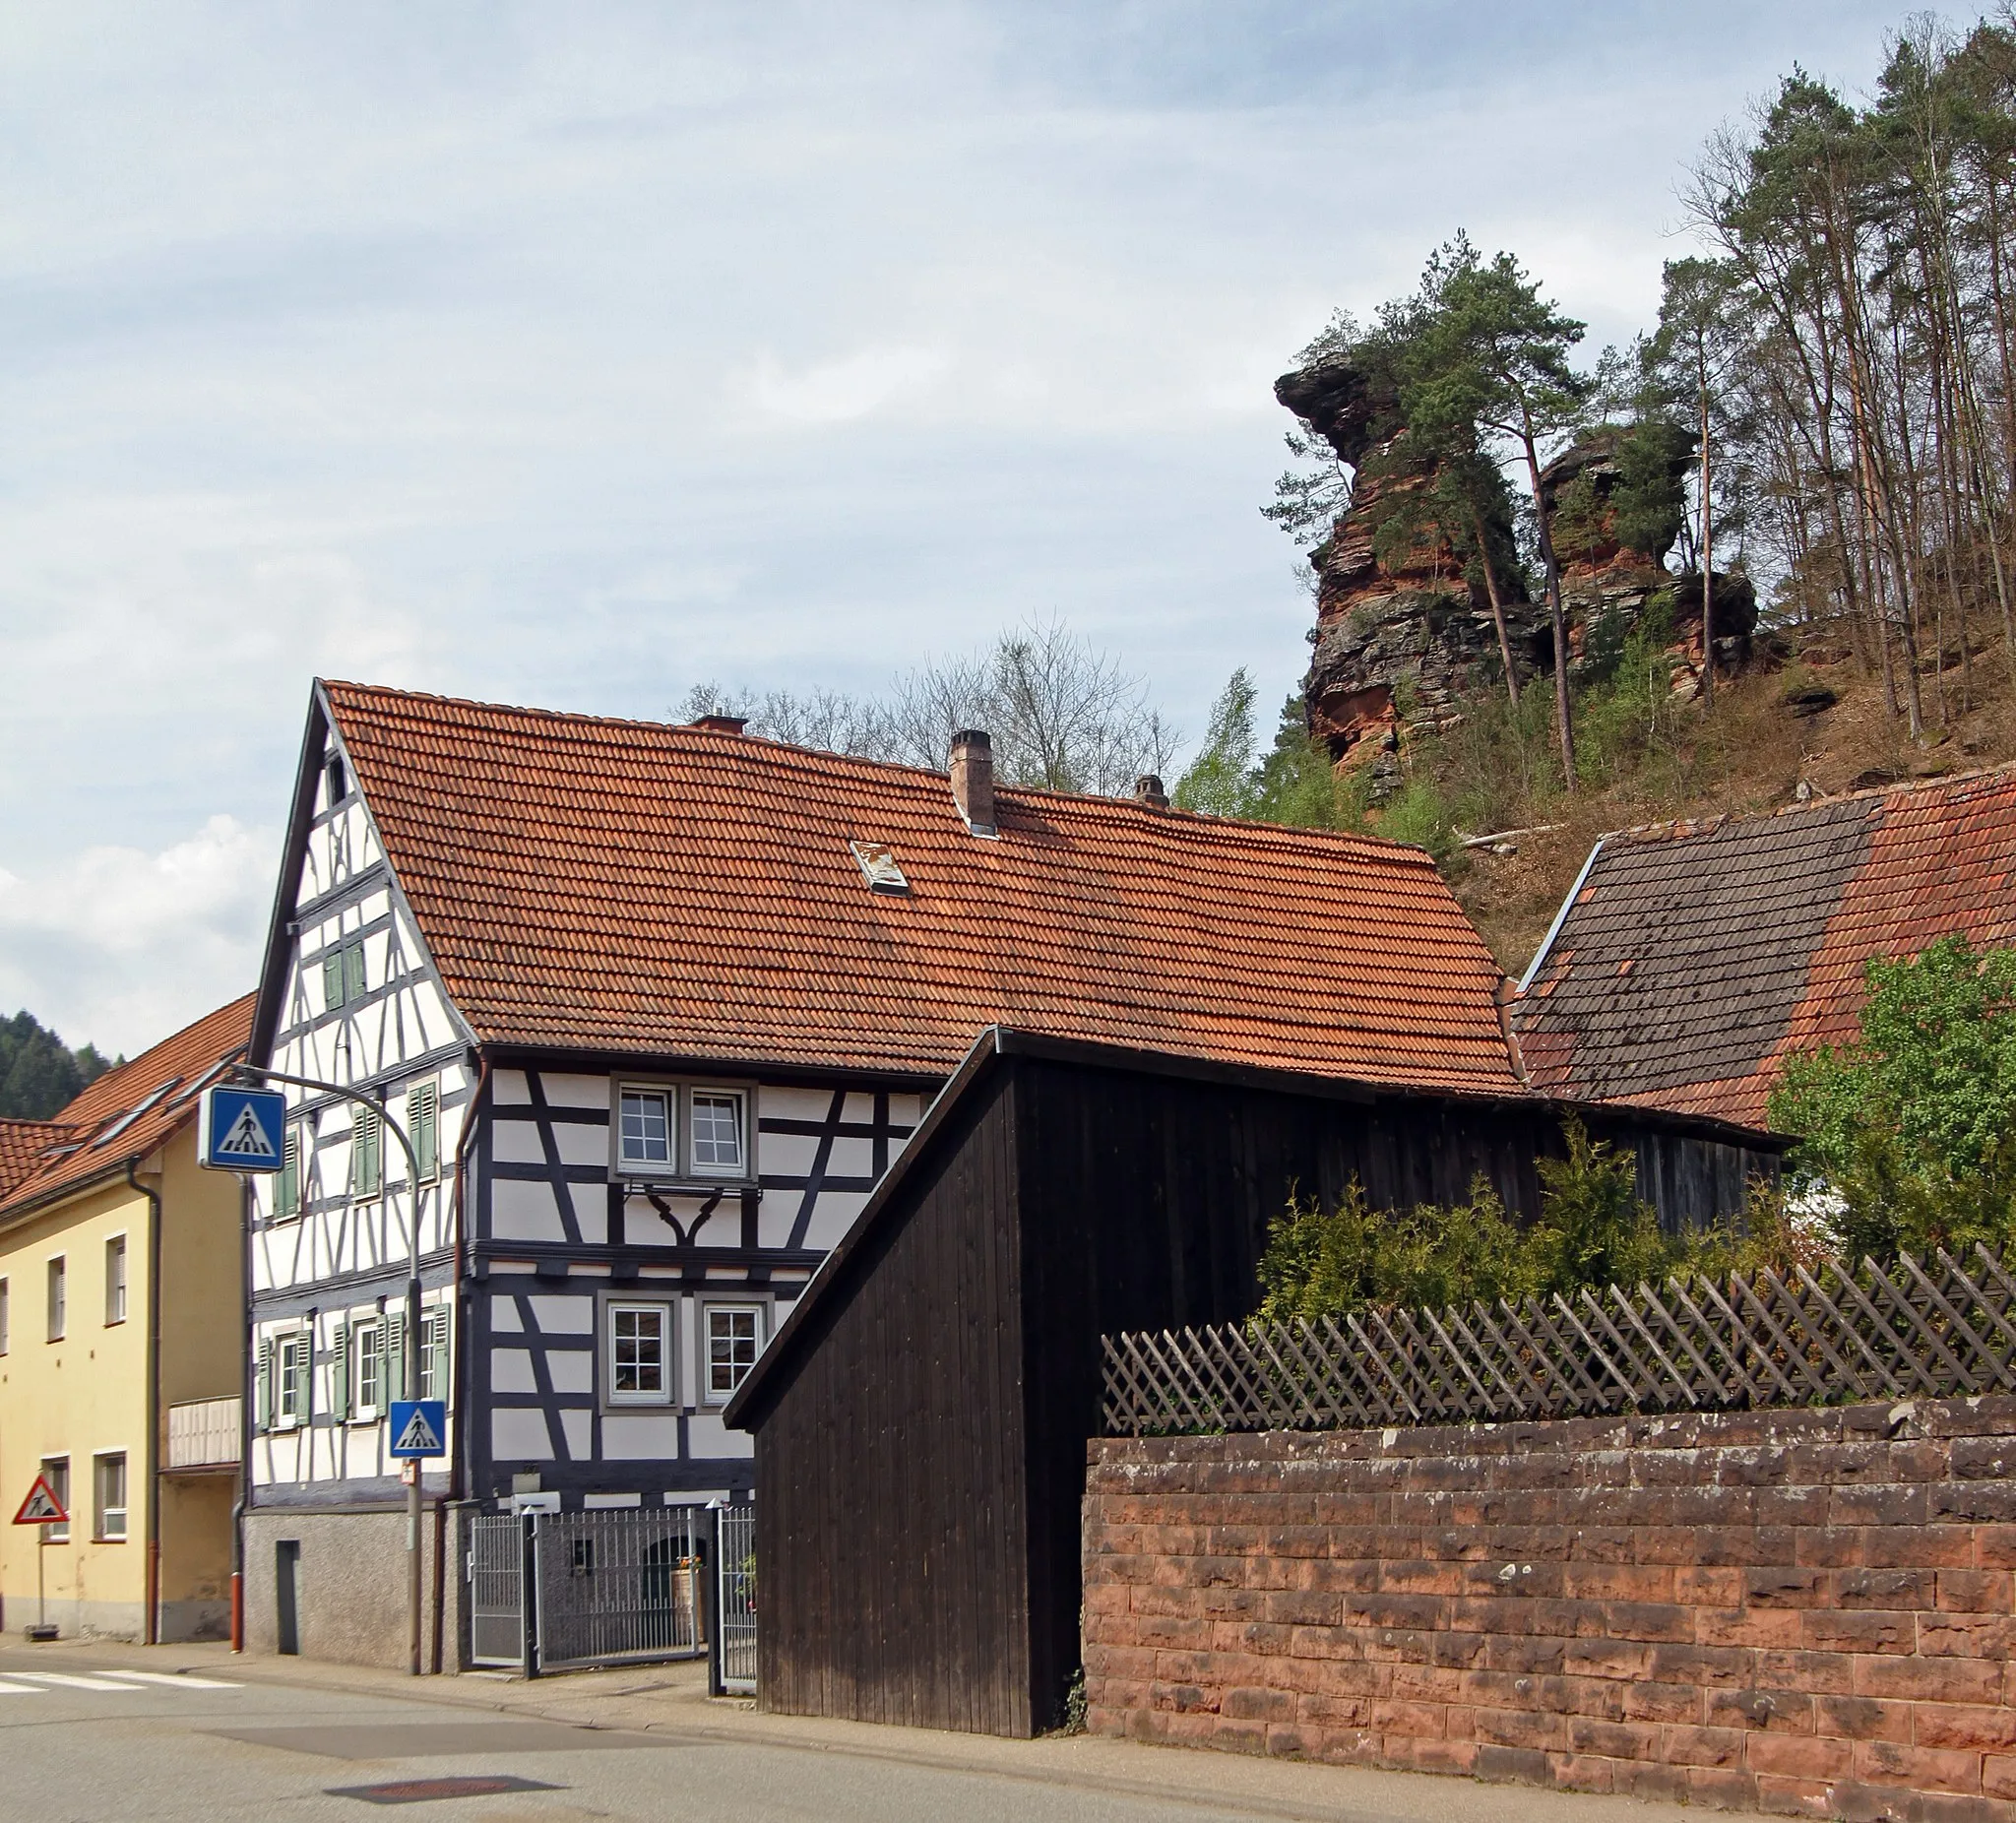 Photo showing: Cultural heritage monument in Hinterweidenthal